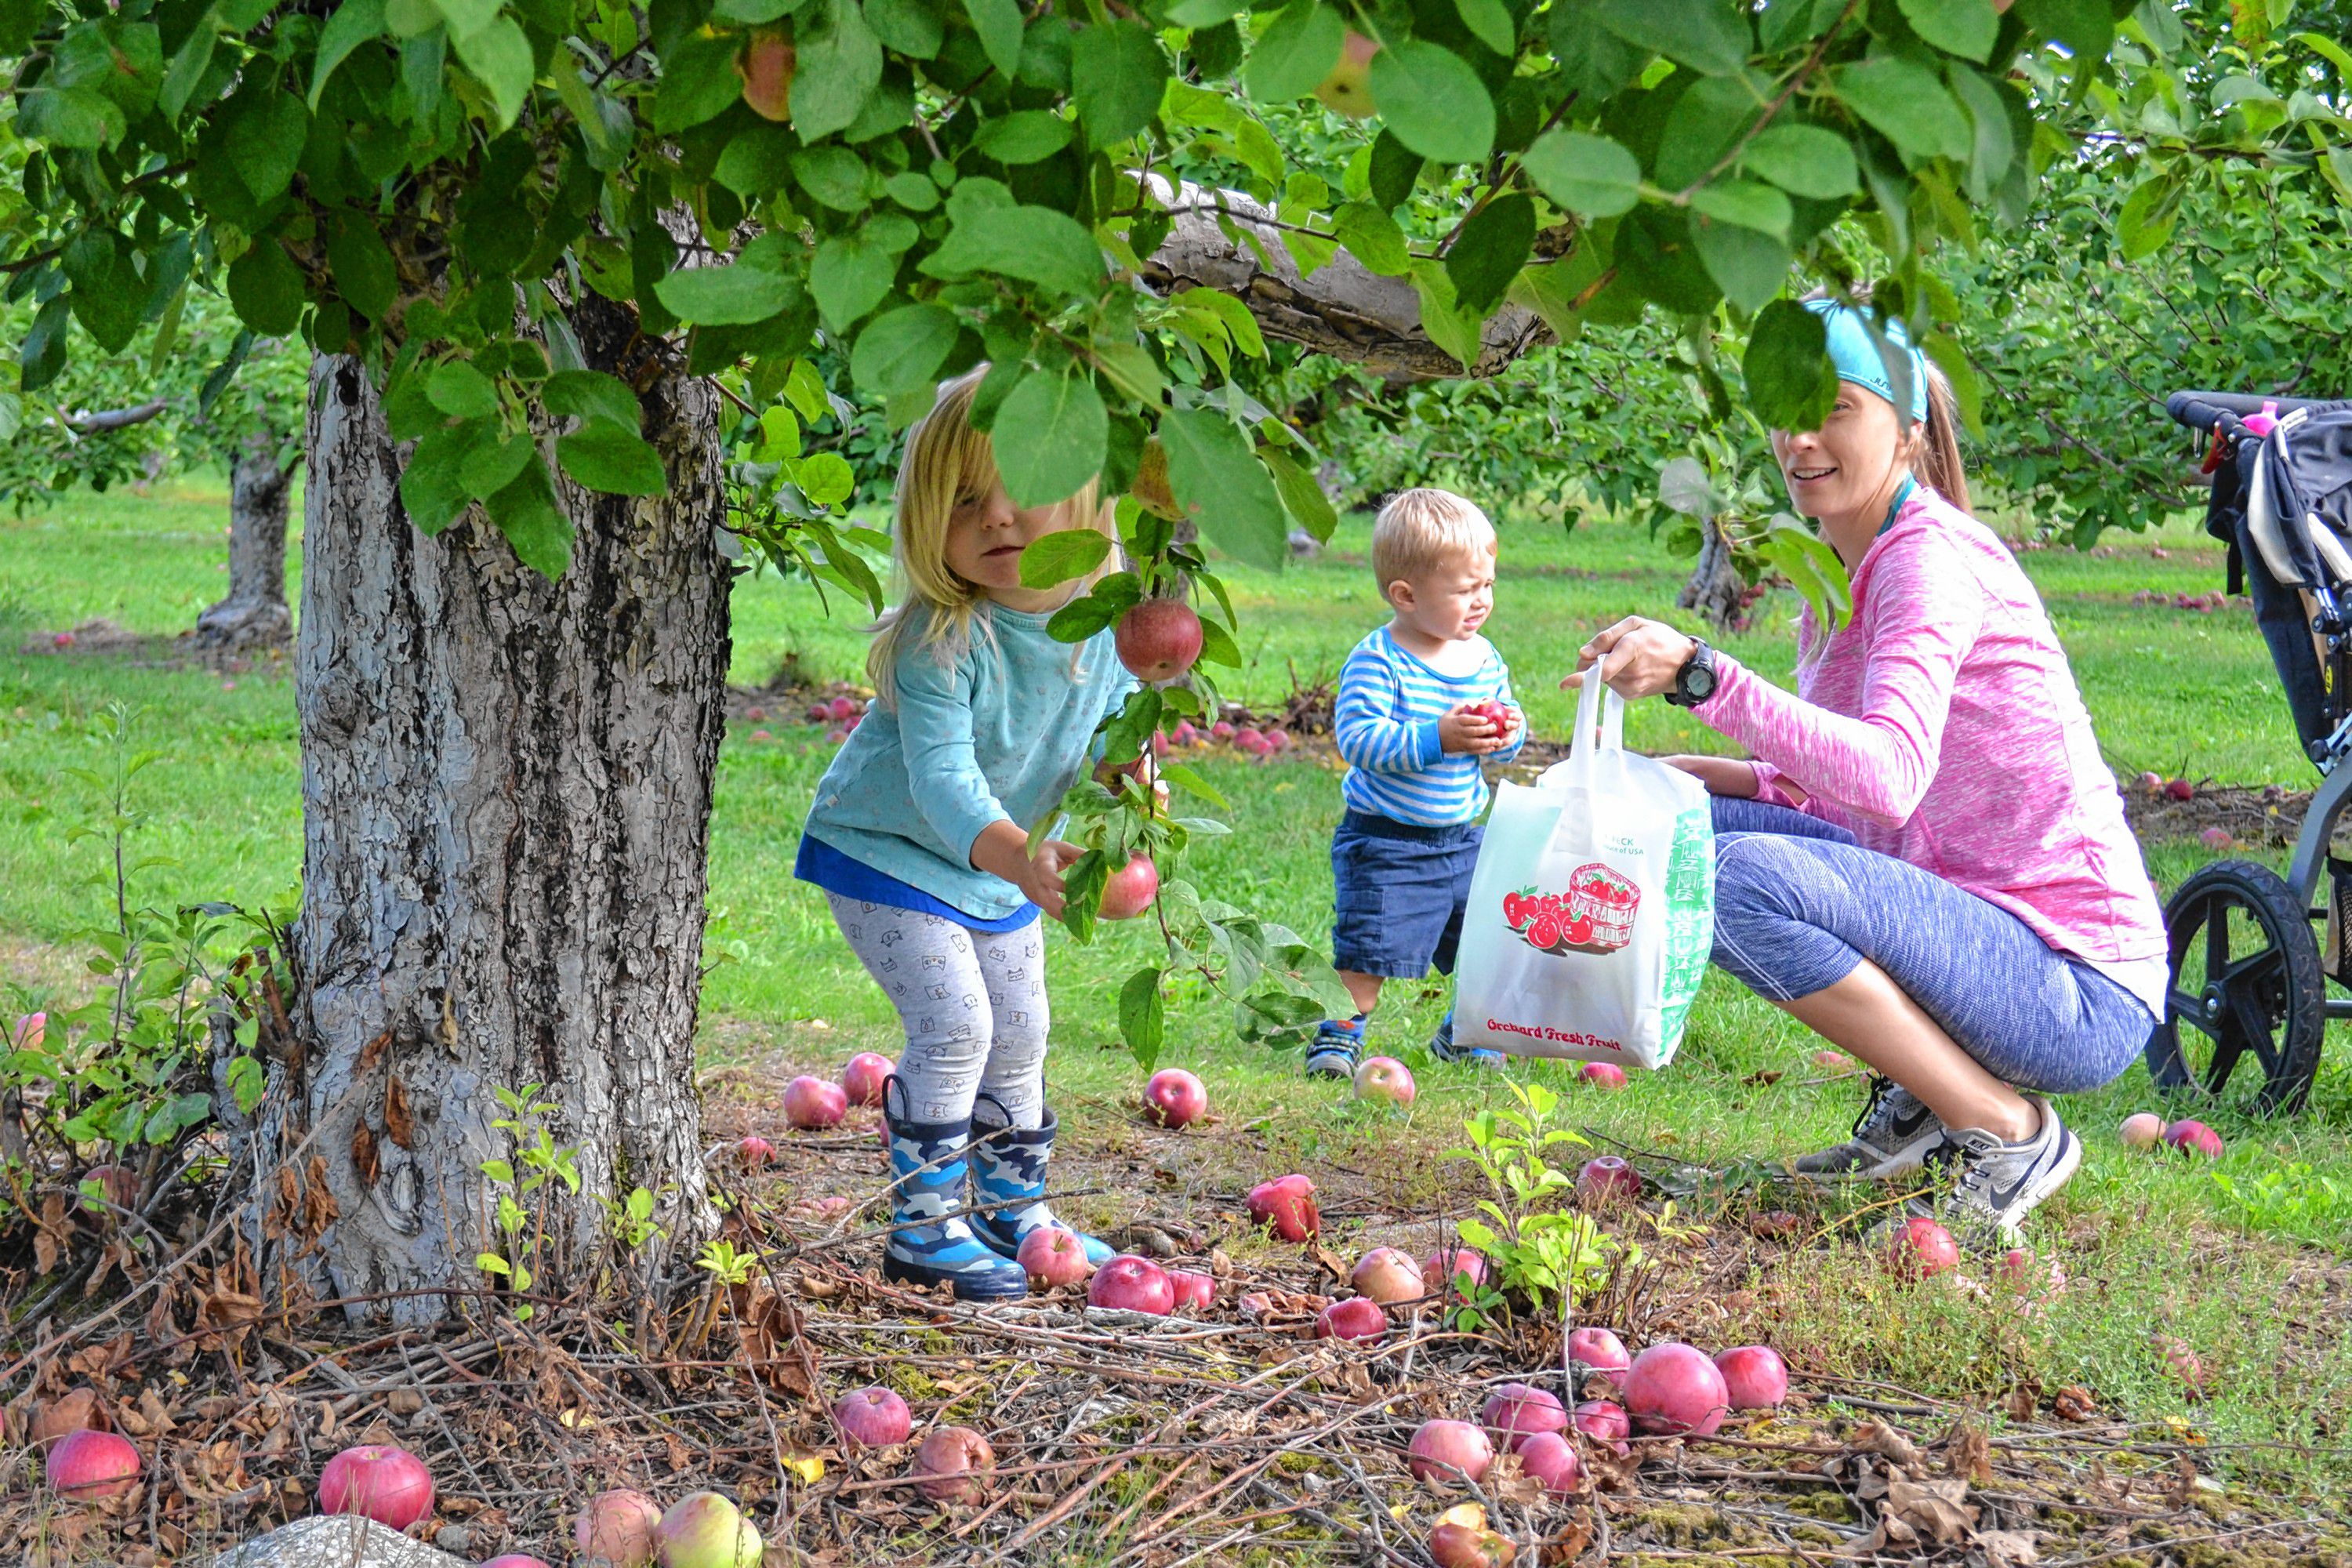 The Top Spots to Pick Your Own Apples in Washington